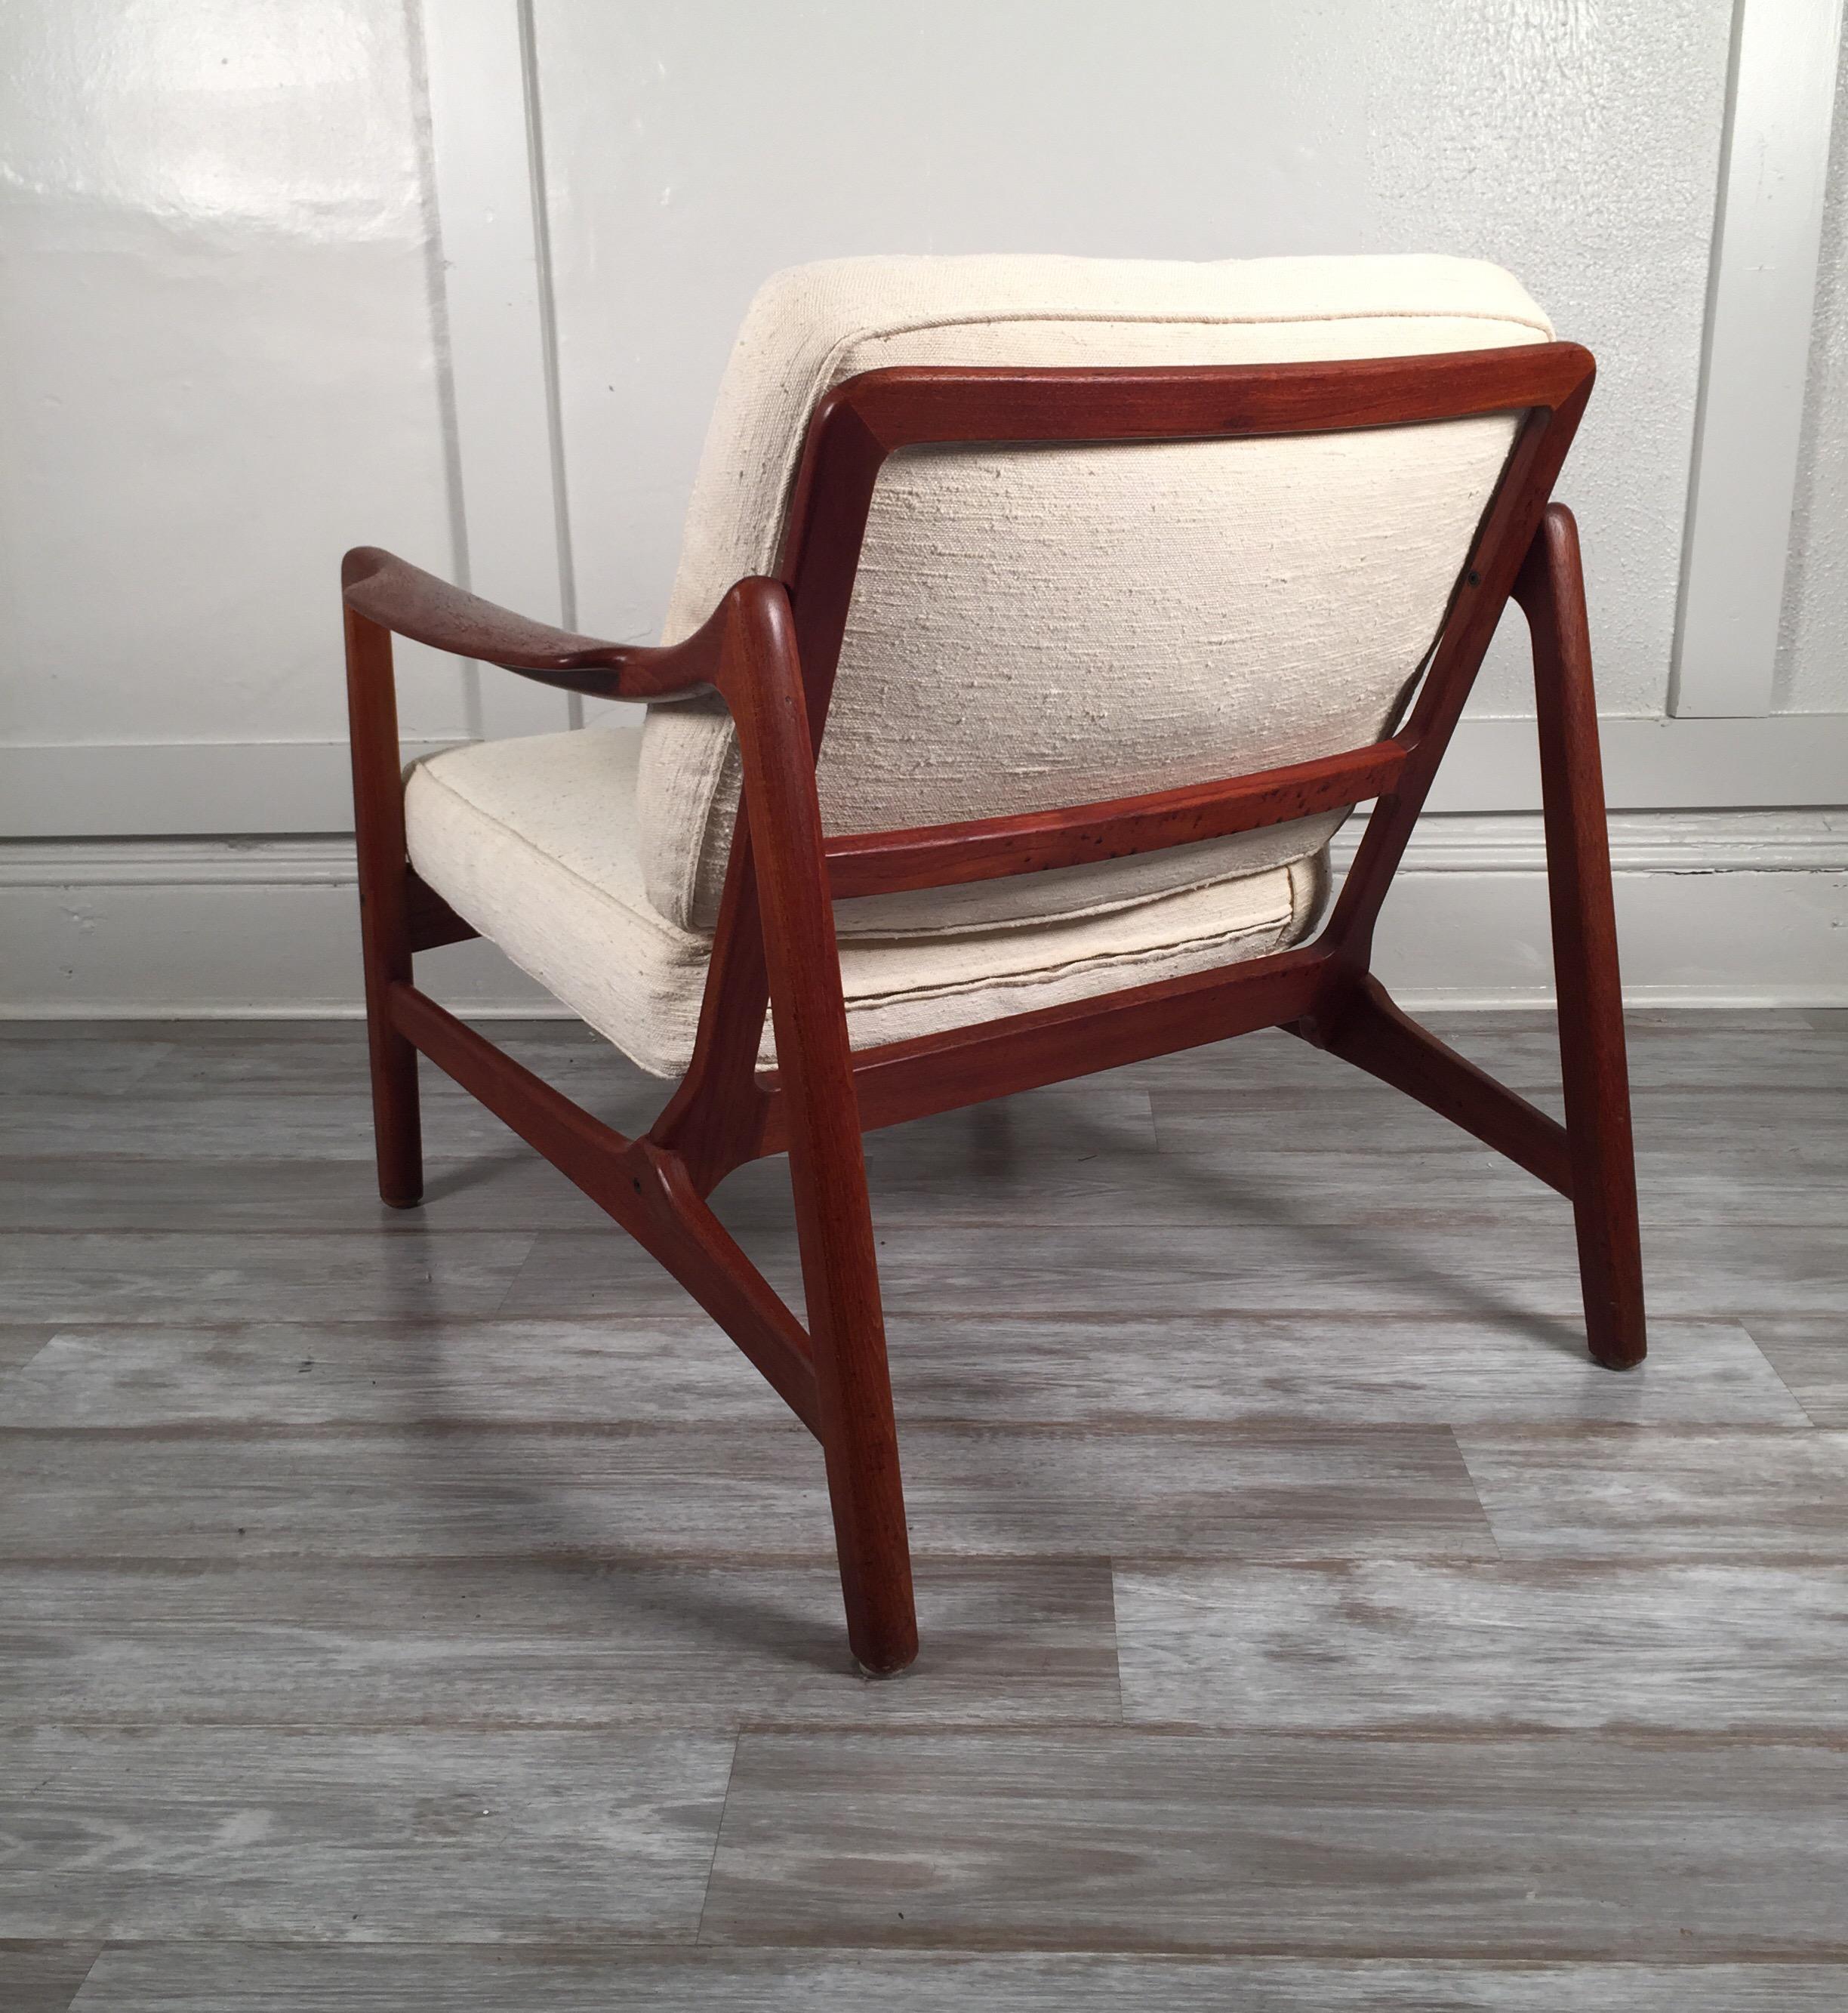 Danish Lounge Chair by Tove and Edvard Kindt-Larsen